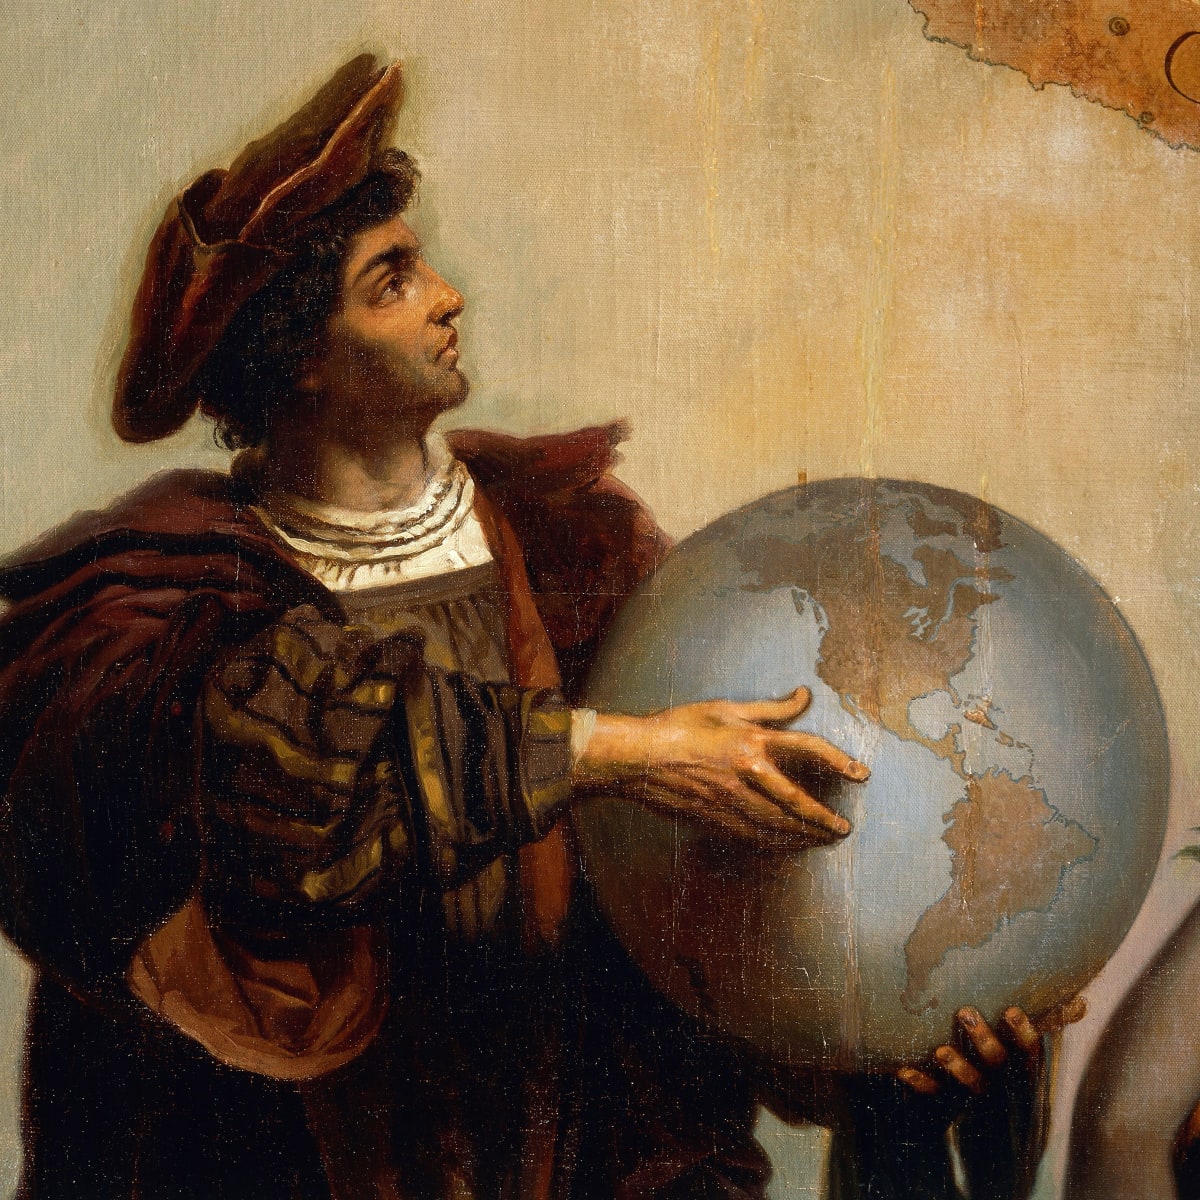 lies from childhood - Christopher Columbus proved the Earth was round by discovering America.